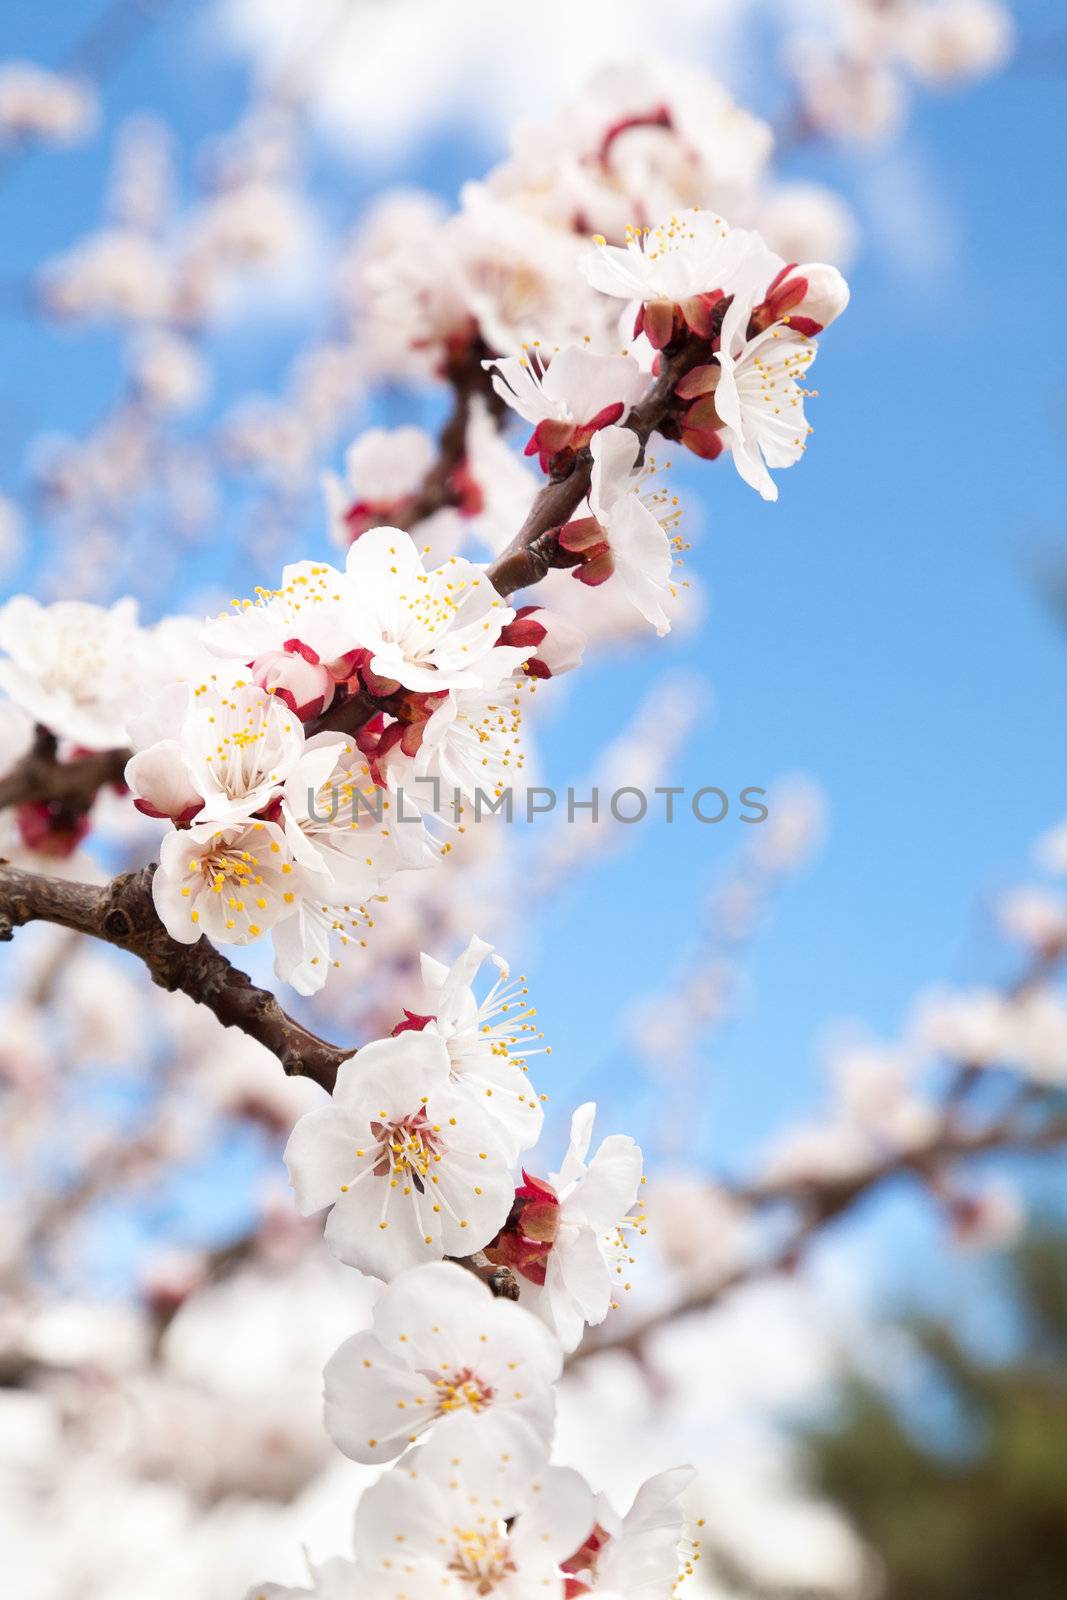 A branch full of fresh open blossoms. Apricot tree.